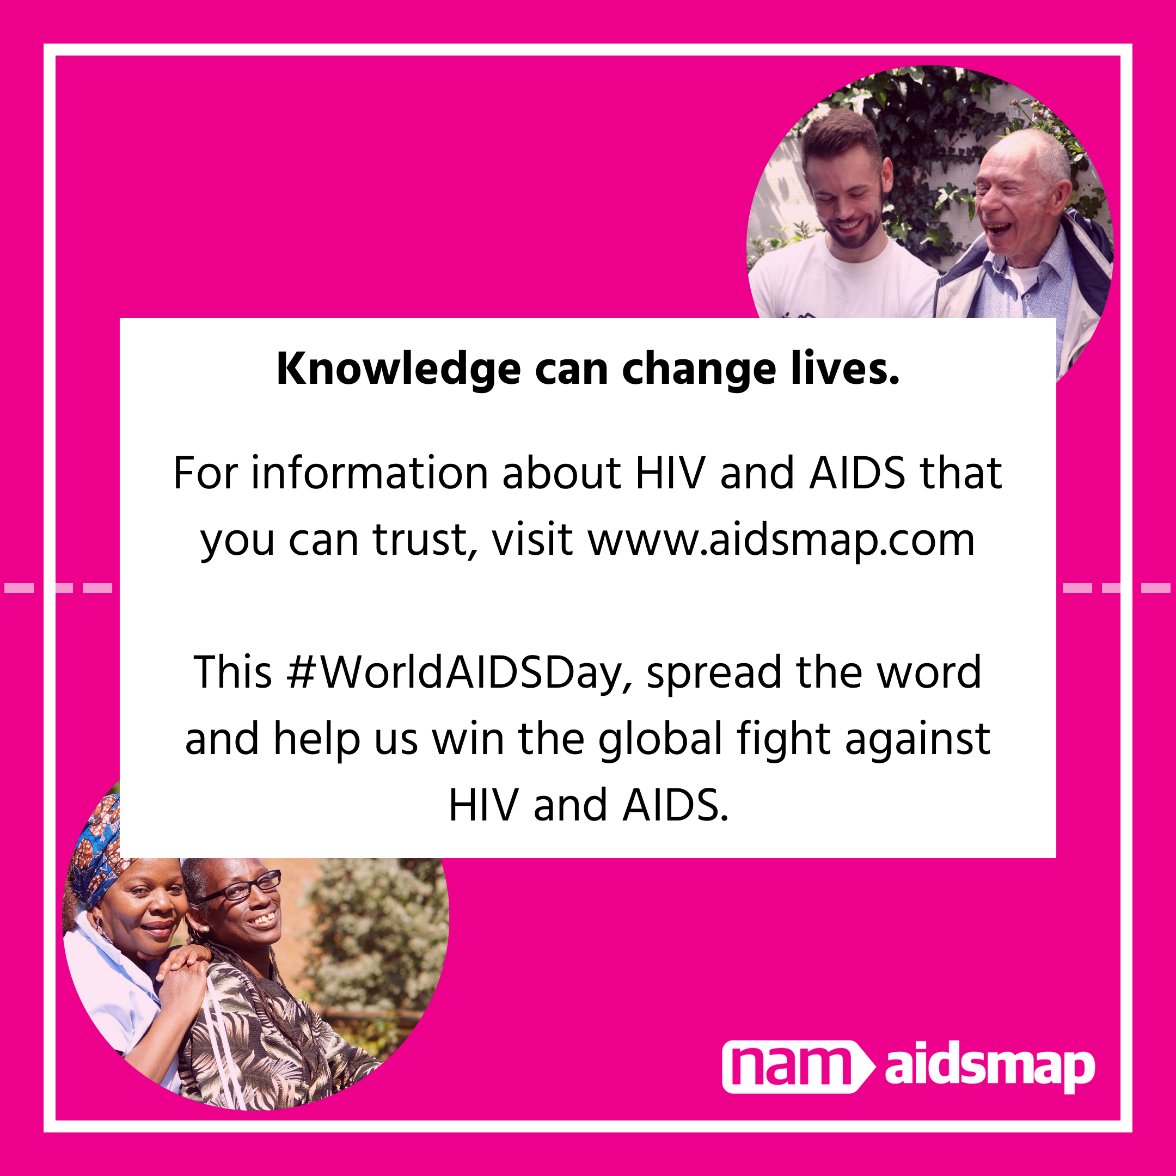 People with HIV on effective treatment can live long healthy lives & not pass on the virus to sexual partners. Yet each year 1m+ people acquire HIV with 600k+ AIDS-related deaths. Spread the word this #WorldAIDSDay to win the global fight against HIV&AIDS @aidsmap